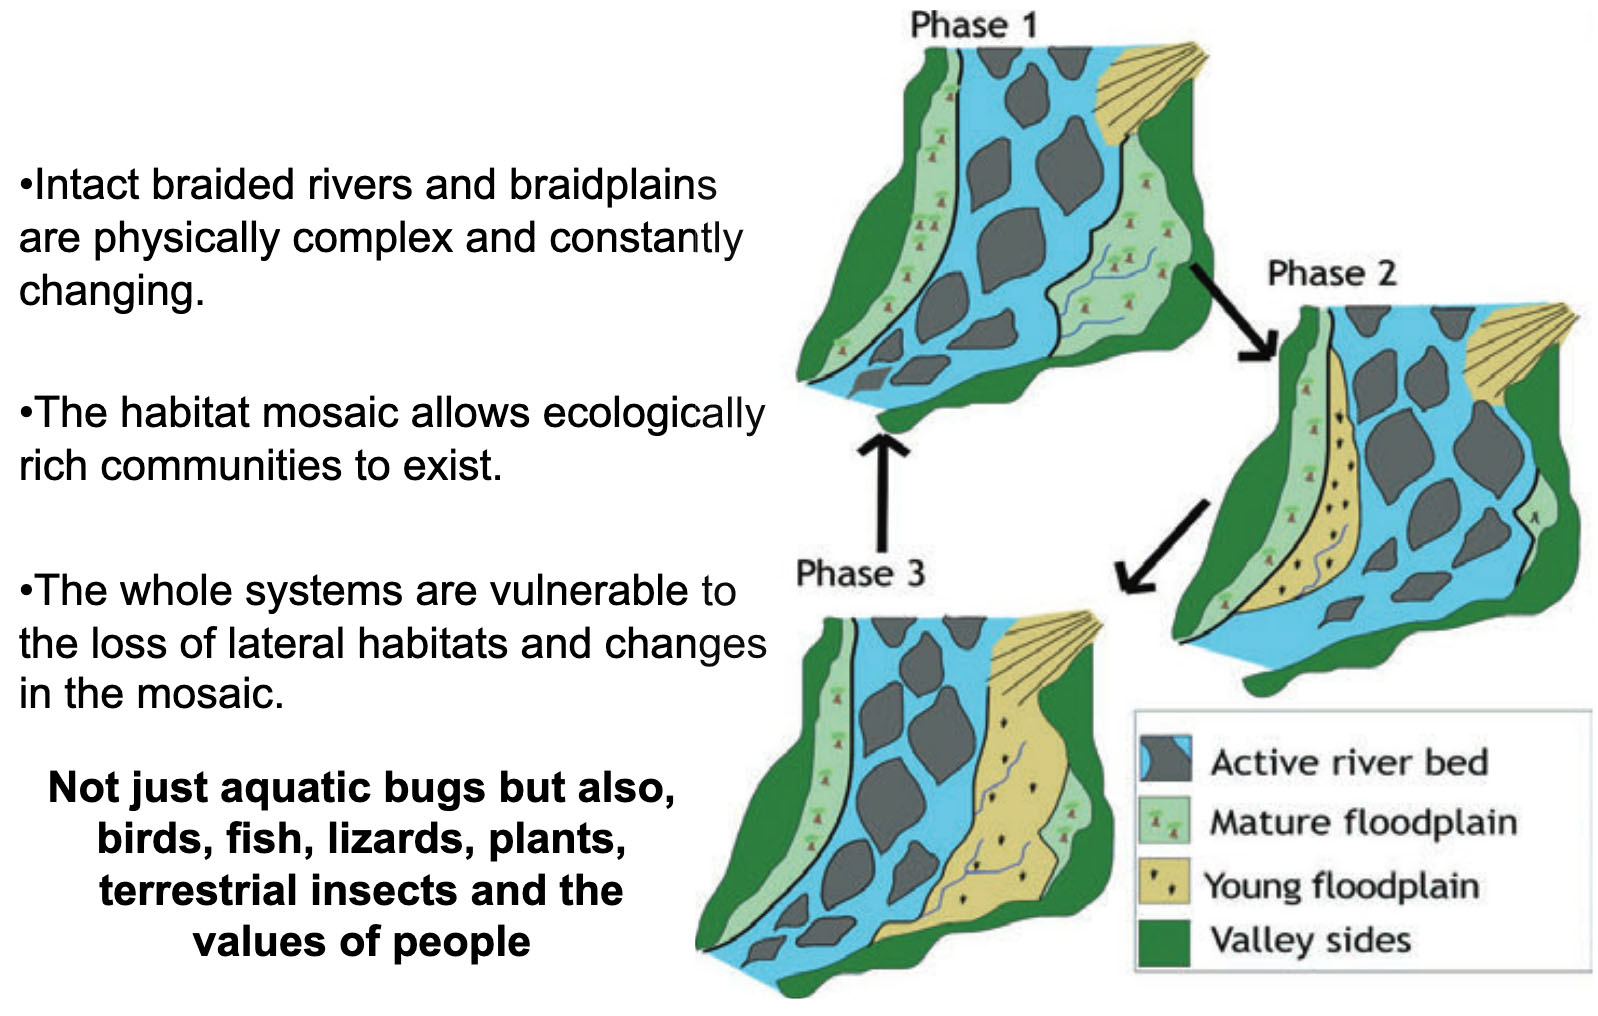 Fig. 2: The mature floodplains of braided rivers (light green) and the young floodplain (beige) are the wetland areas with the greatest species richness.